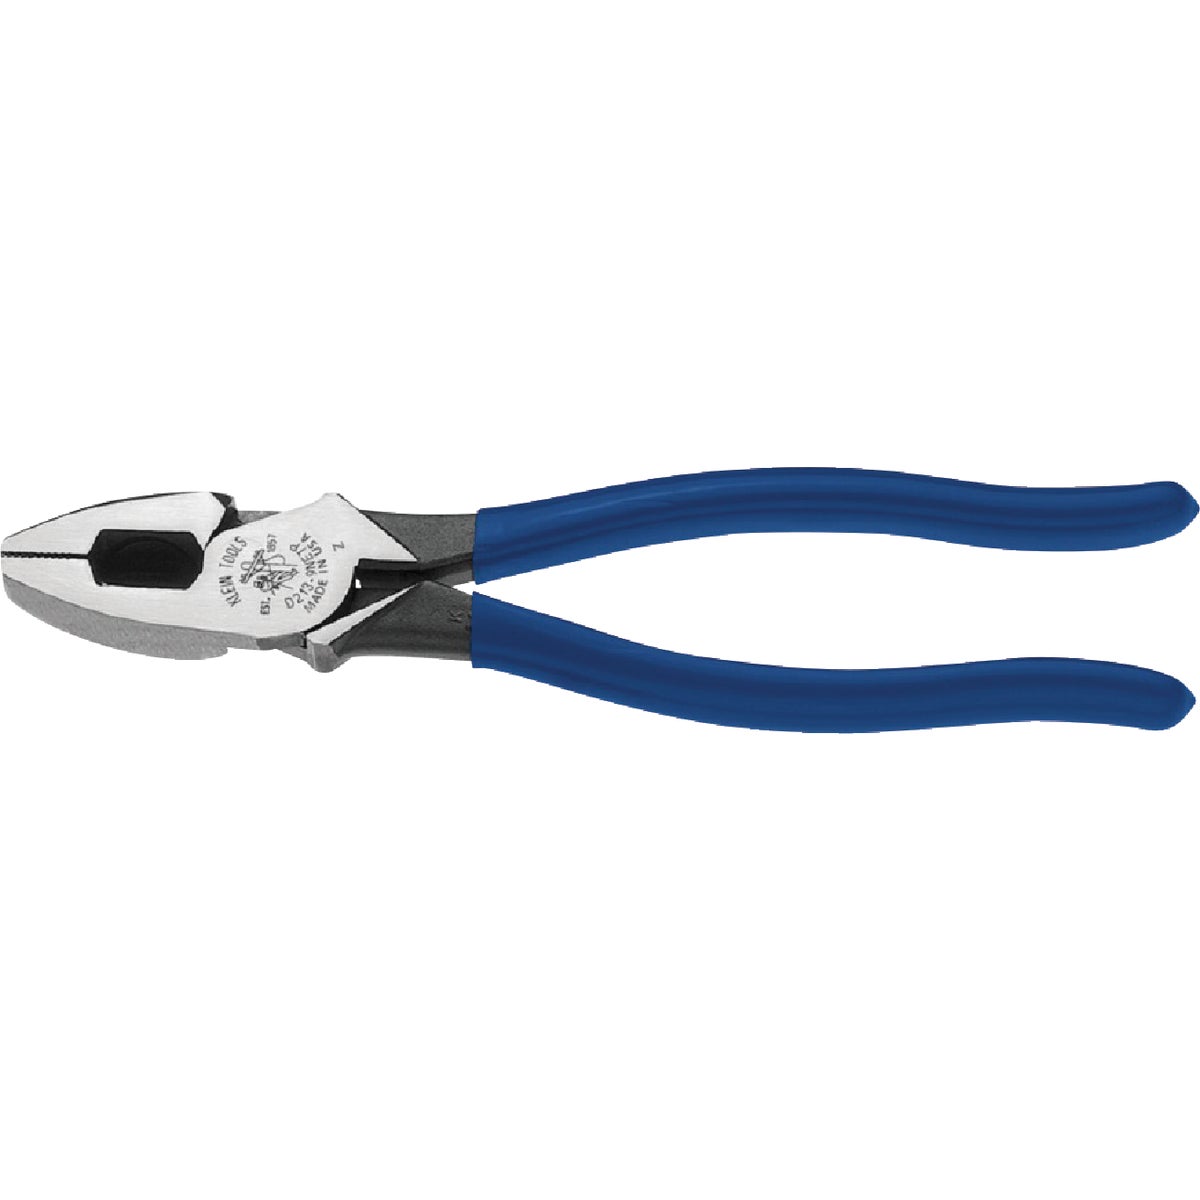 Klein 9-1/4 In. High-Leverage Fish Tape Pulling Linesman Pliers